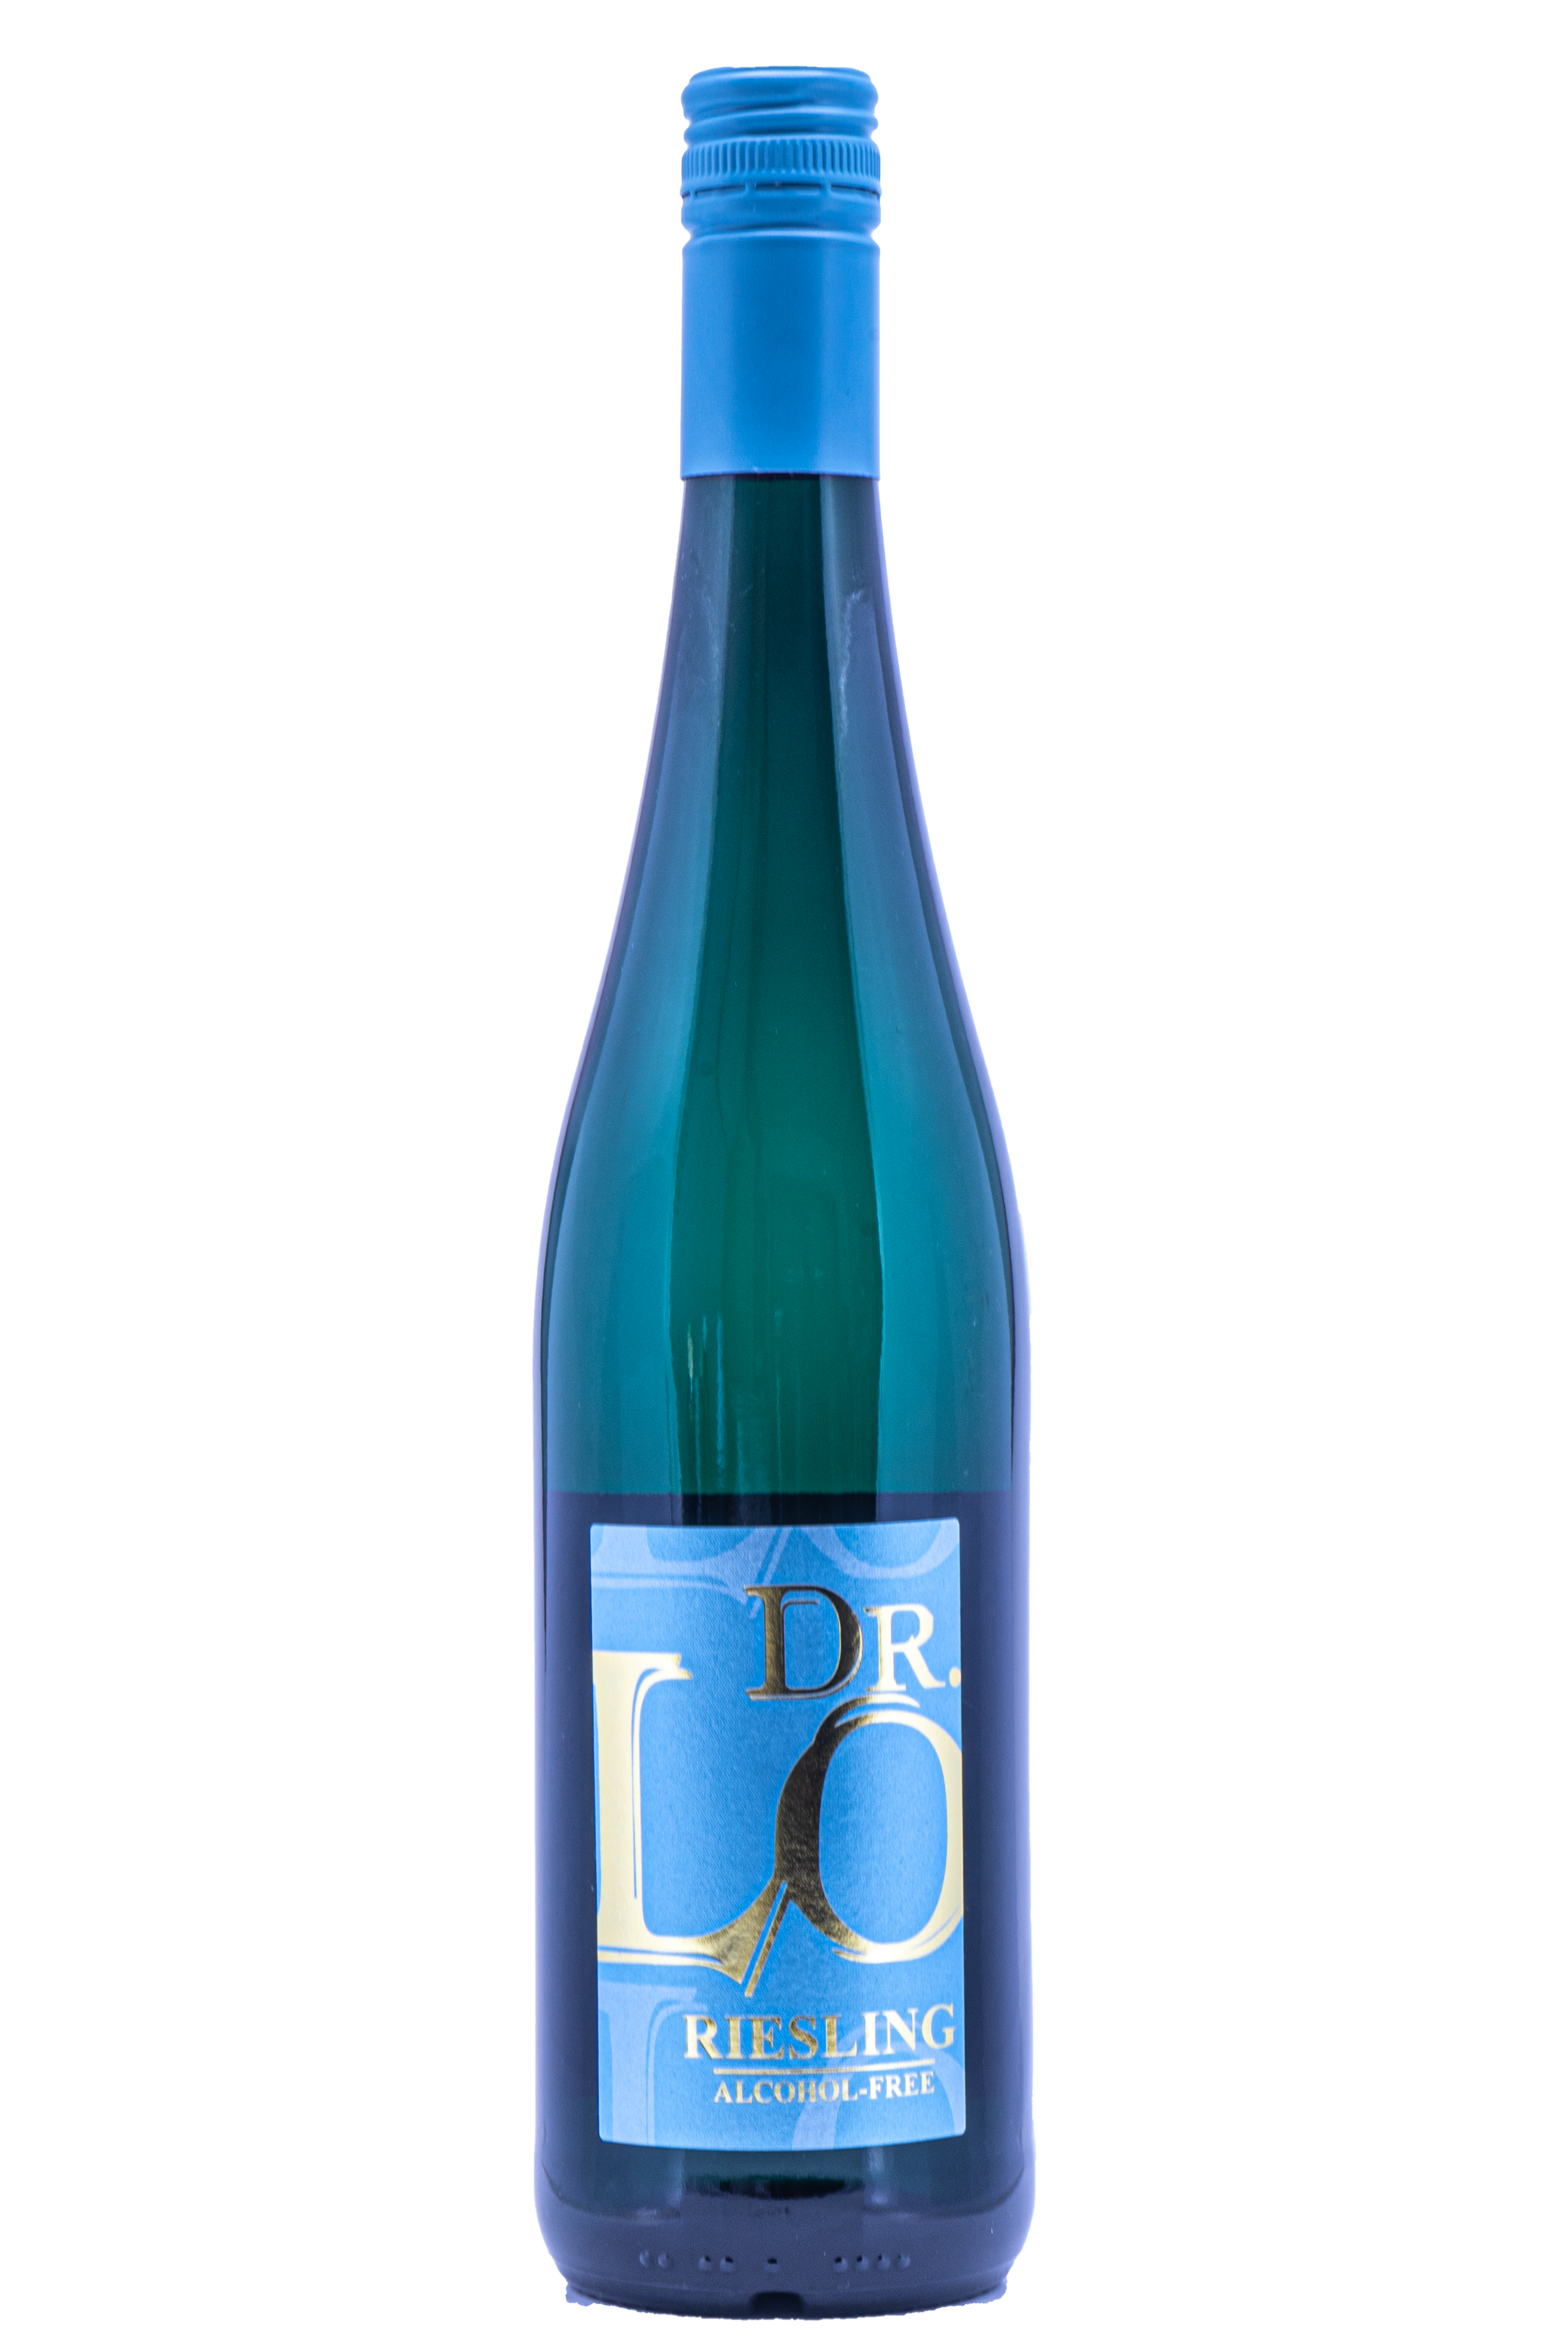 2021 DR. LO Riesling Alkoholfrei 